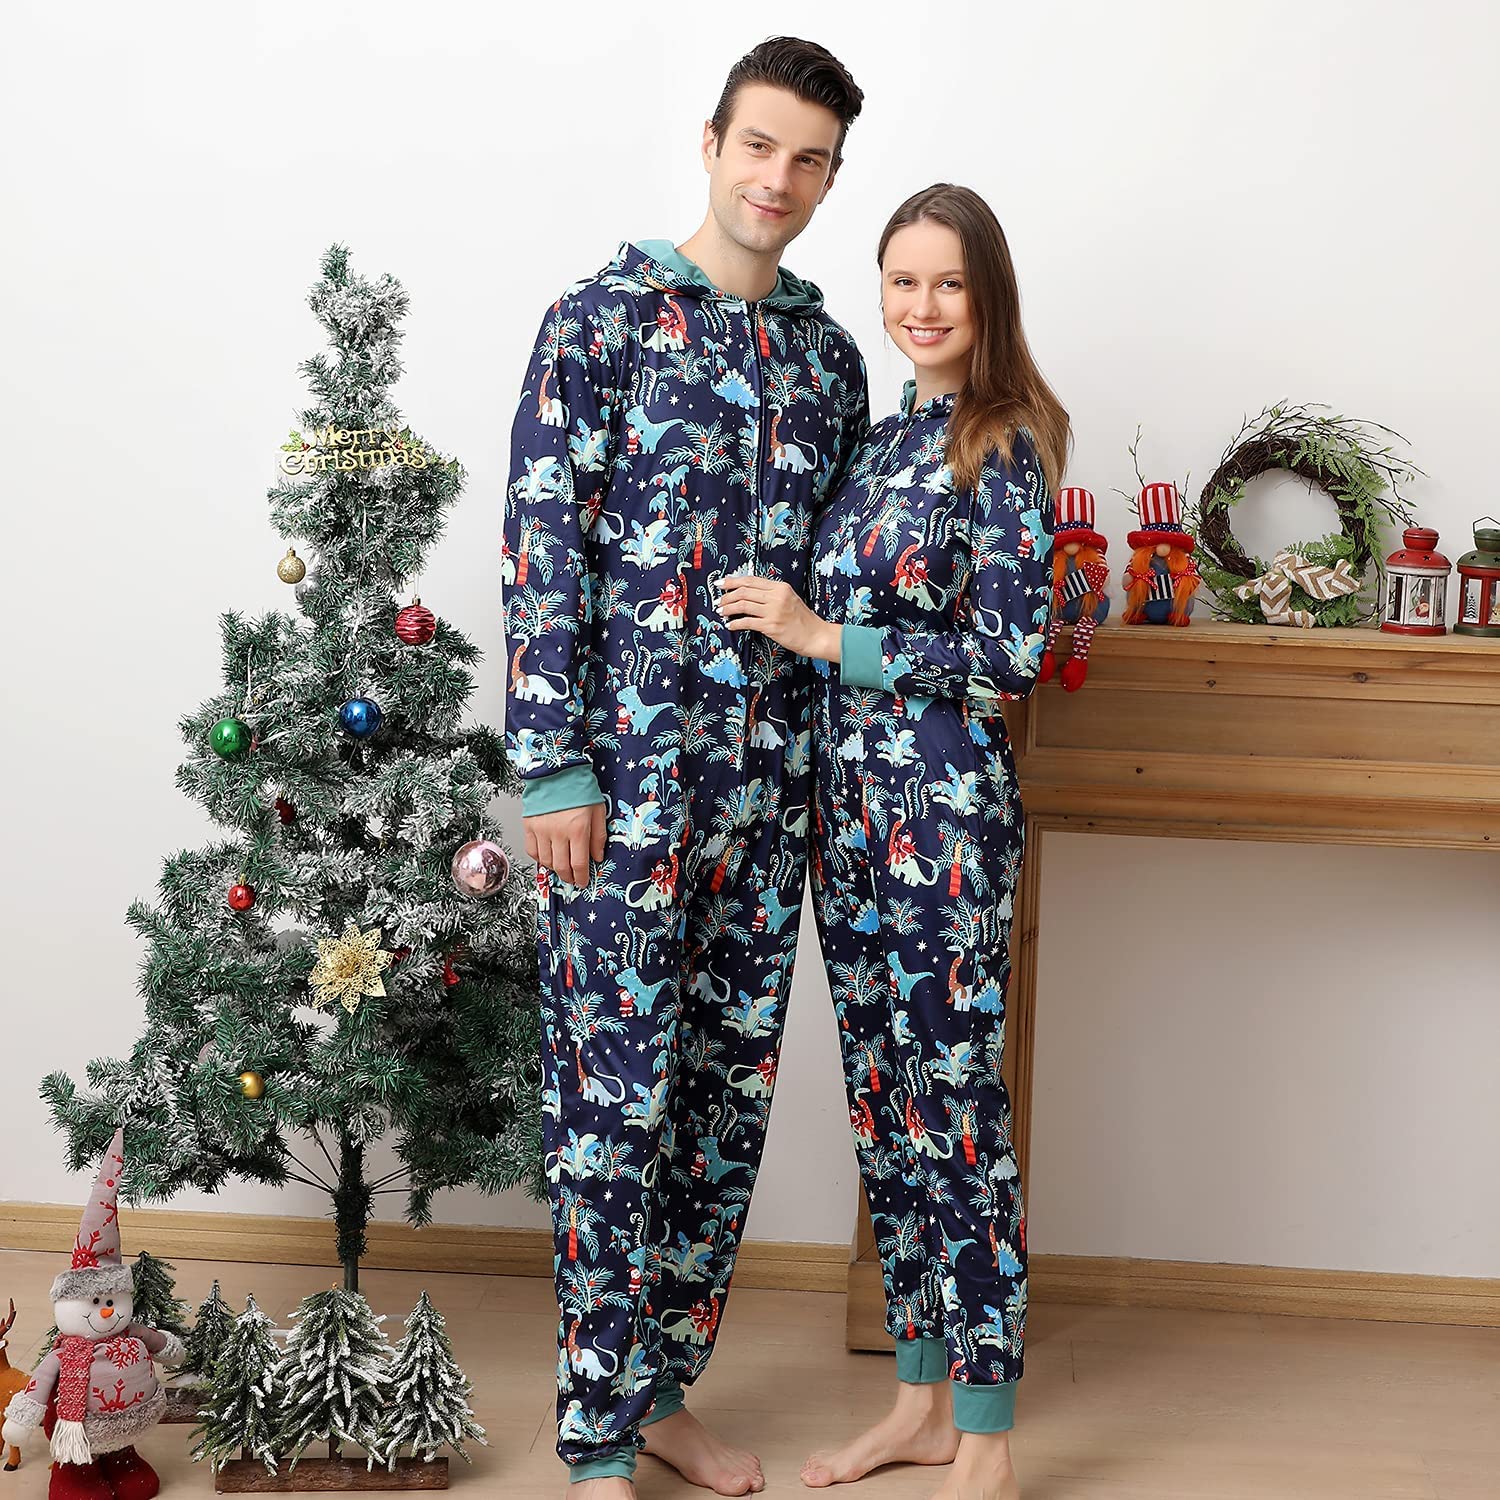 Best Matching Christmas Onesies For Couples 2022